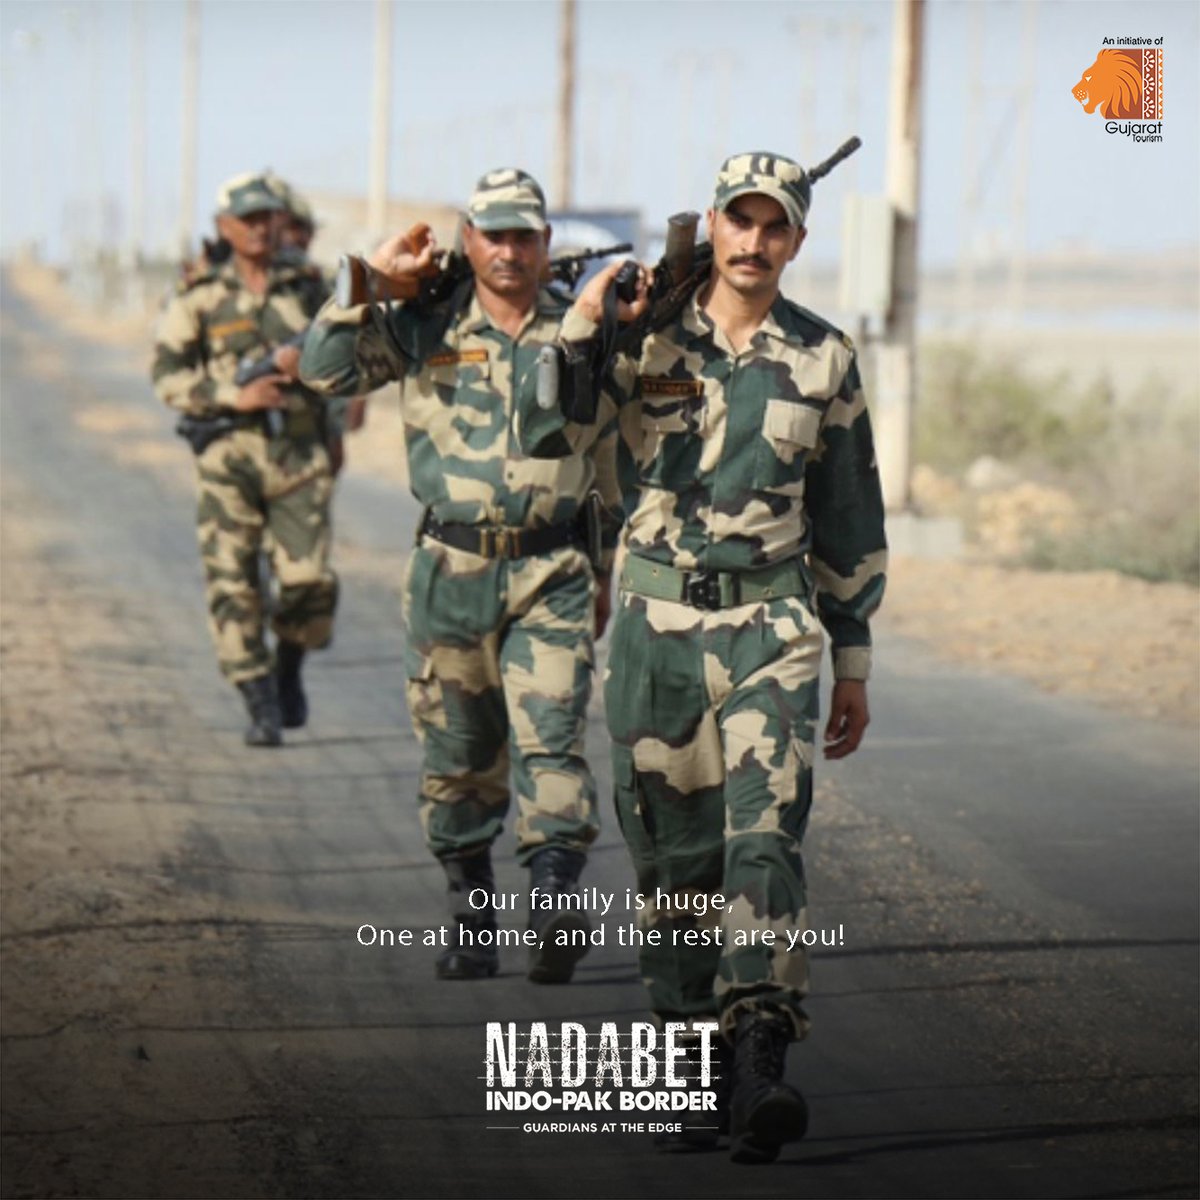 We are a big family, and yes you are part of it. The #BSF proudly calls the nation one big family and invites you to visit #Nadabet #IndoPakBorder, one of India's premium #bordertourism destination.

#bsfjawans #visitnadabet #SeemaDarshan #gujarat #gujarattourism